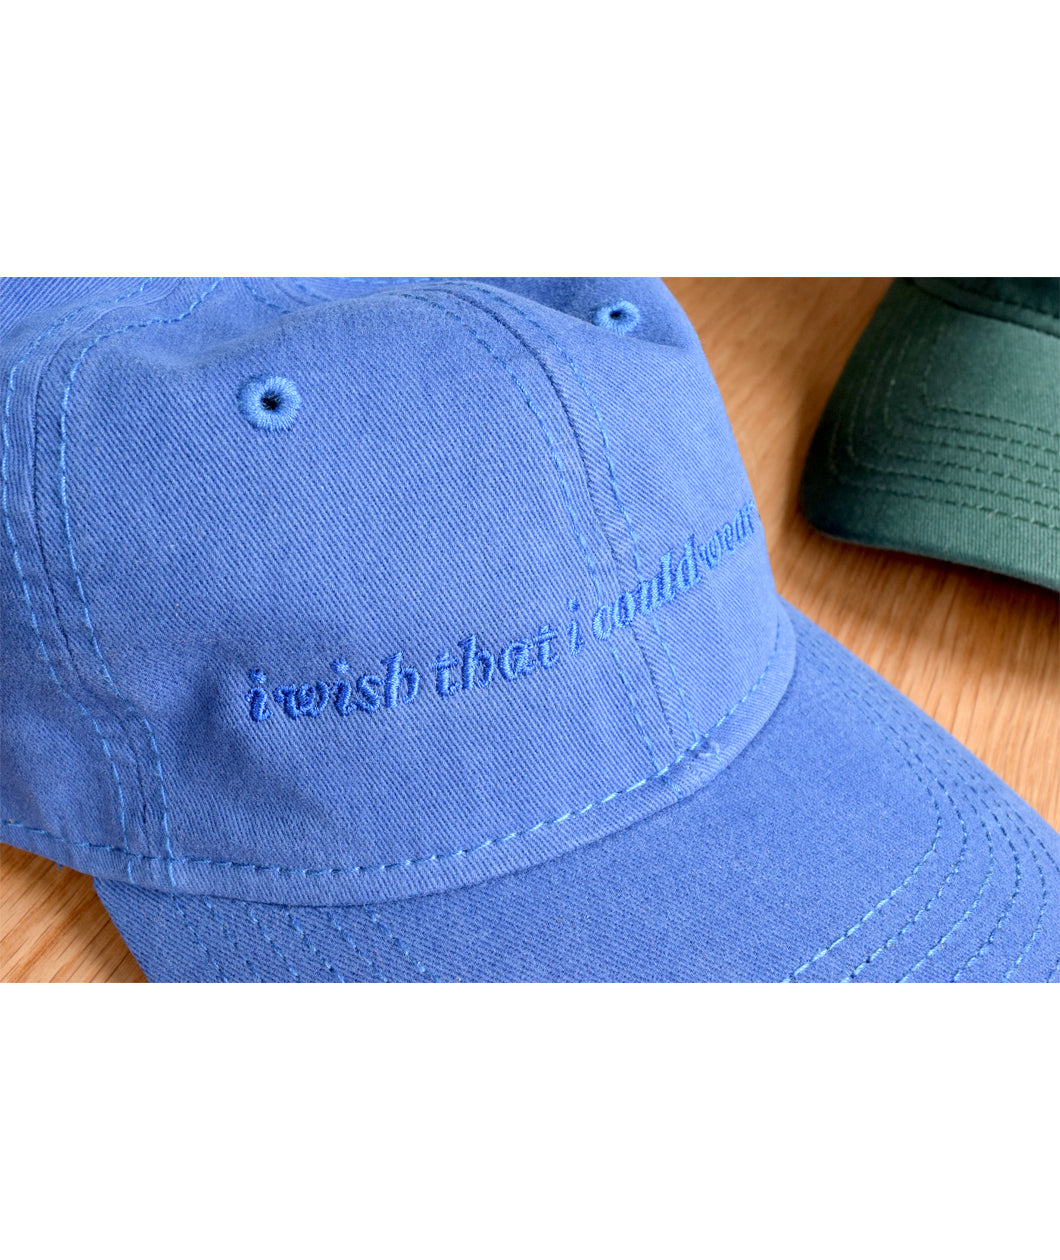 Close up of blue ball cap with lowercase embroidered words saying "i wish that i could wear hats". From Brian David Gilbert. 